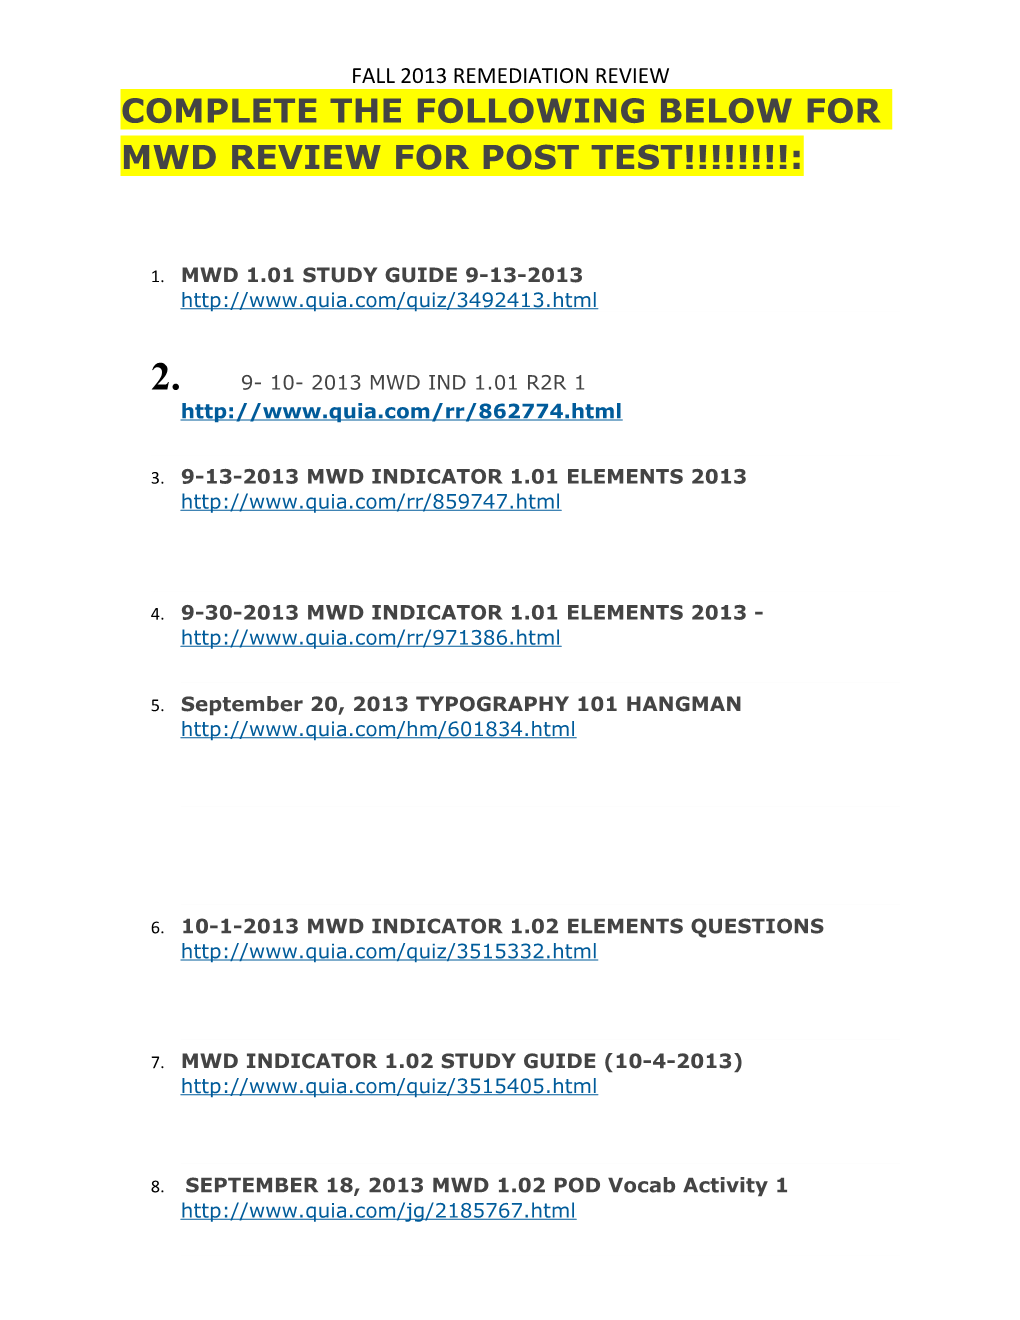 Complete the Following Below for Mwd Review for Post Test